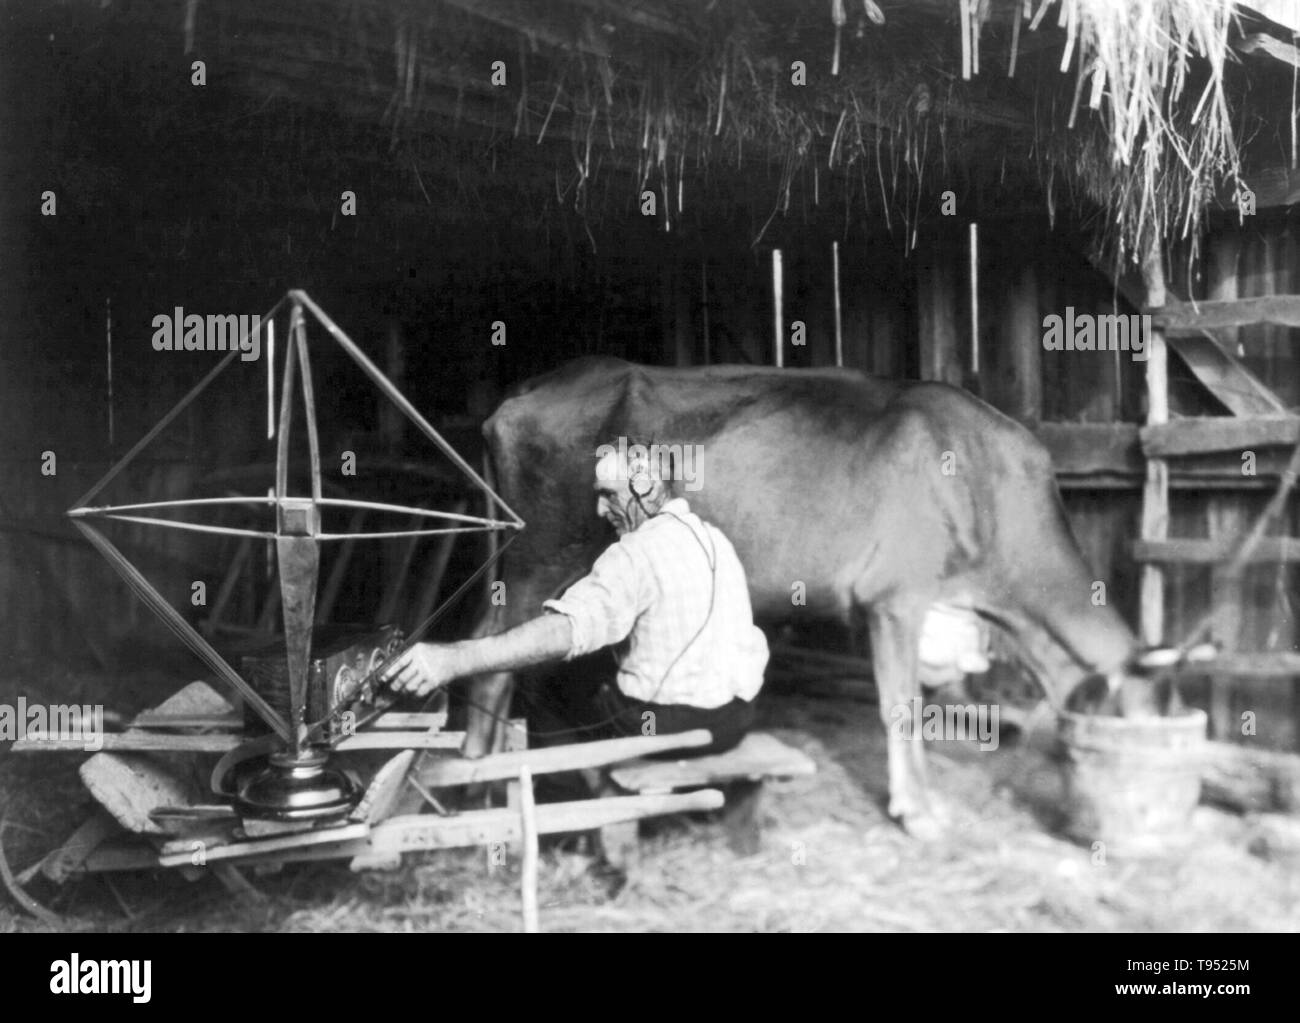 Himmel ganske enkelt Dental Entitled: "The milkman tunes in at milking time" showing dairy farmer  tuning radio as he prepares to milk a cow while wearing headphones. Milking  is the act of removing milk from the